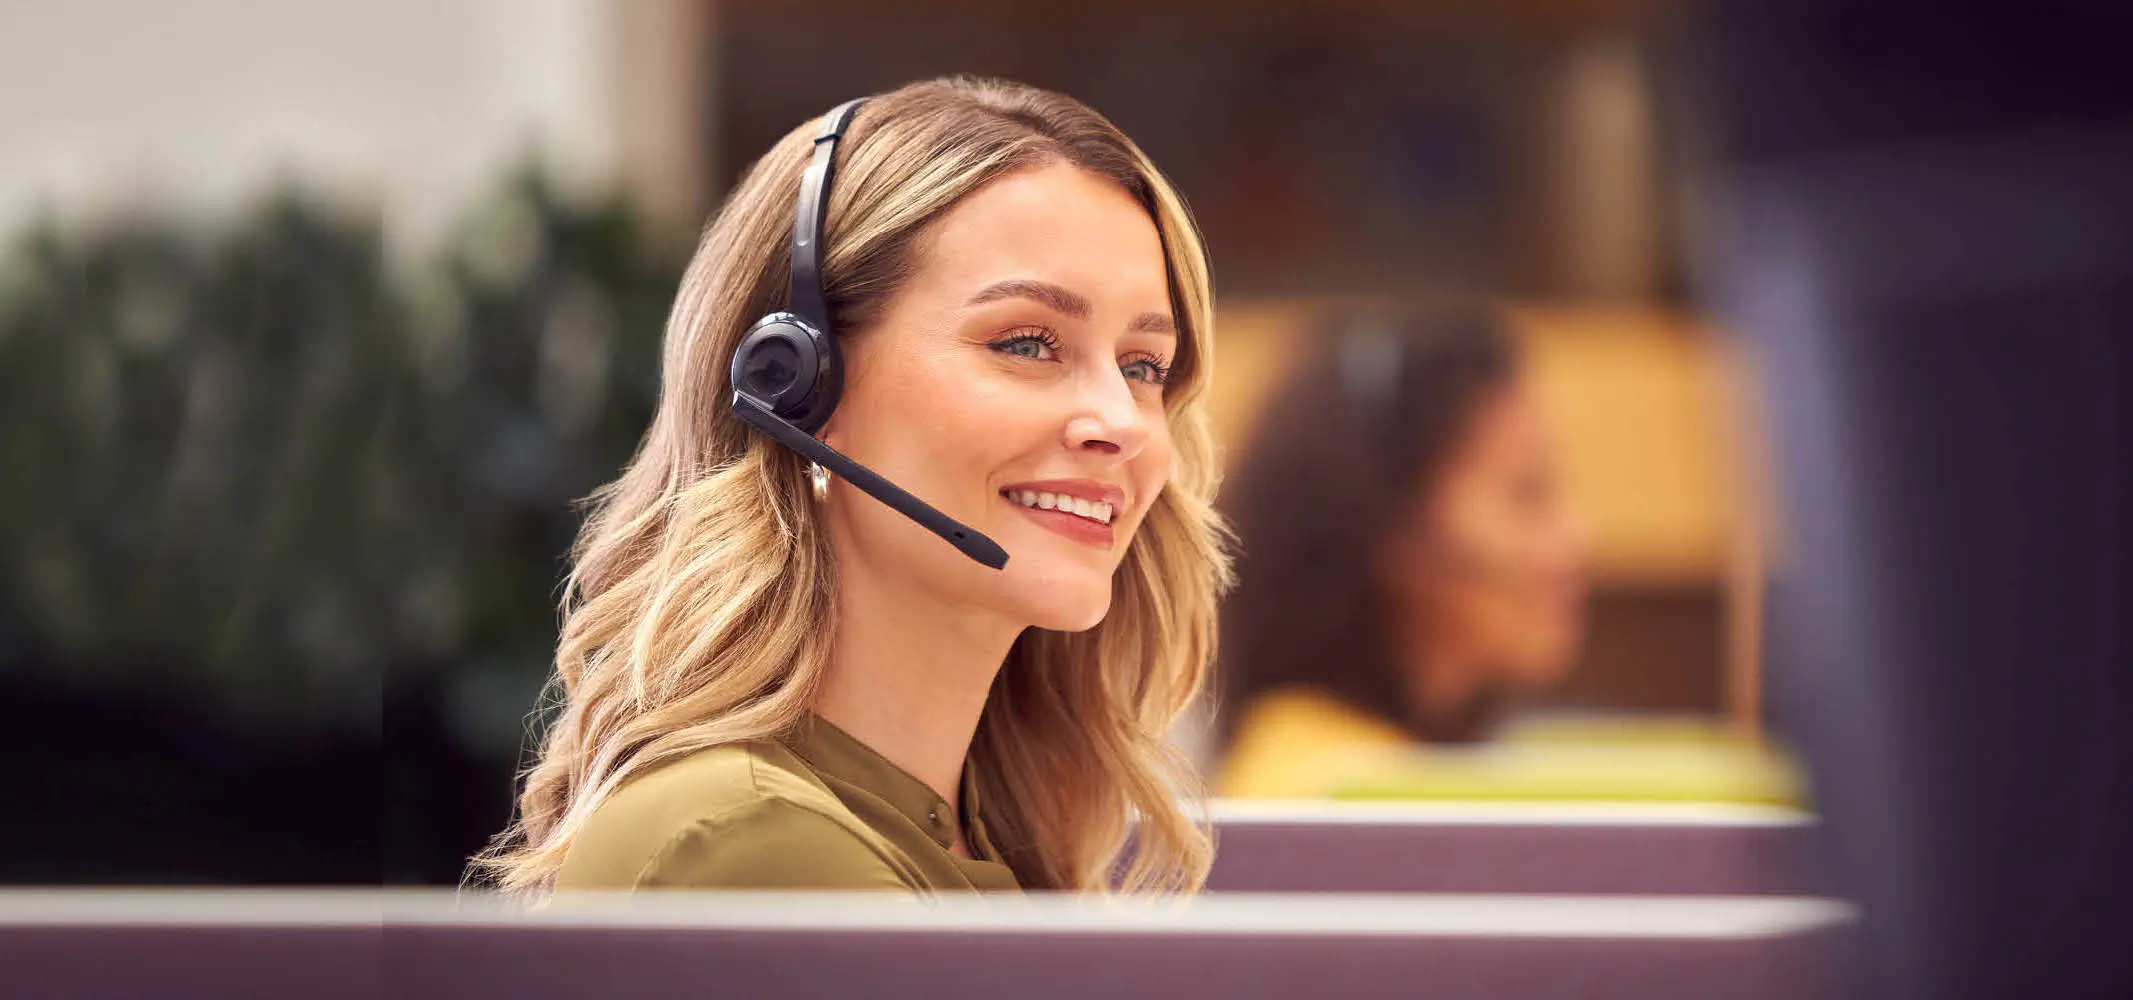 A happy customer service agent talking to a customer